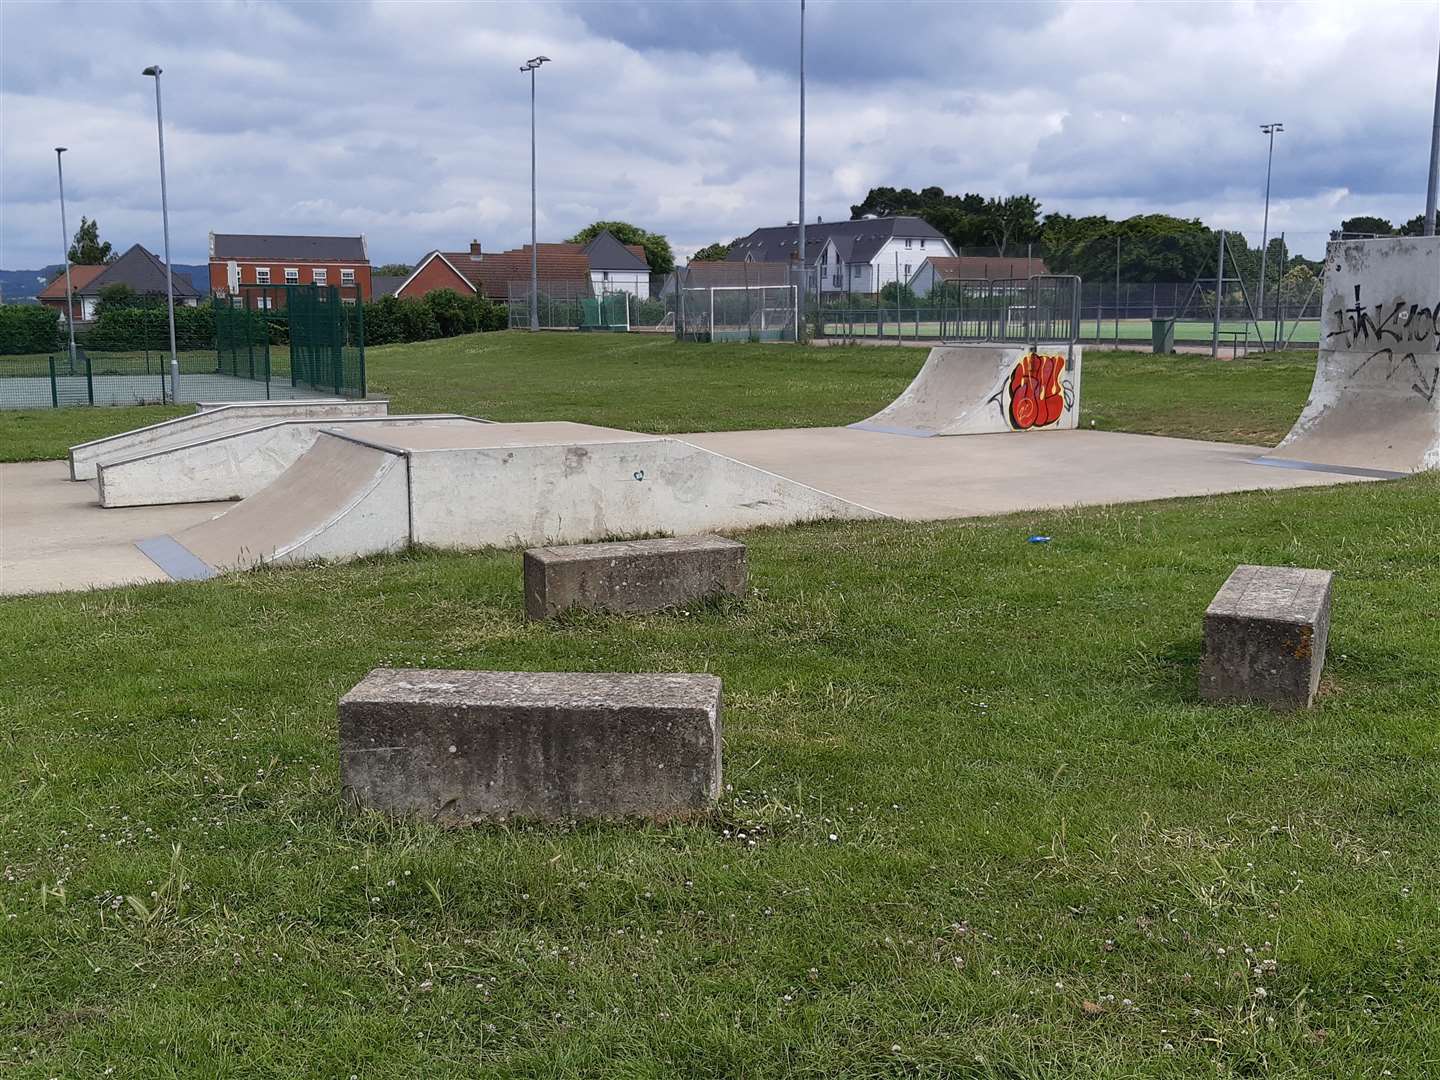 Some BMX ramps remain at South Park